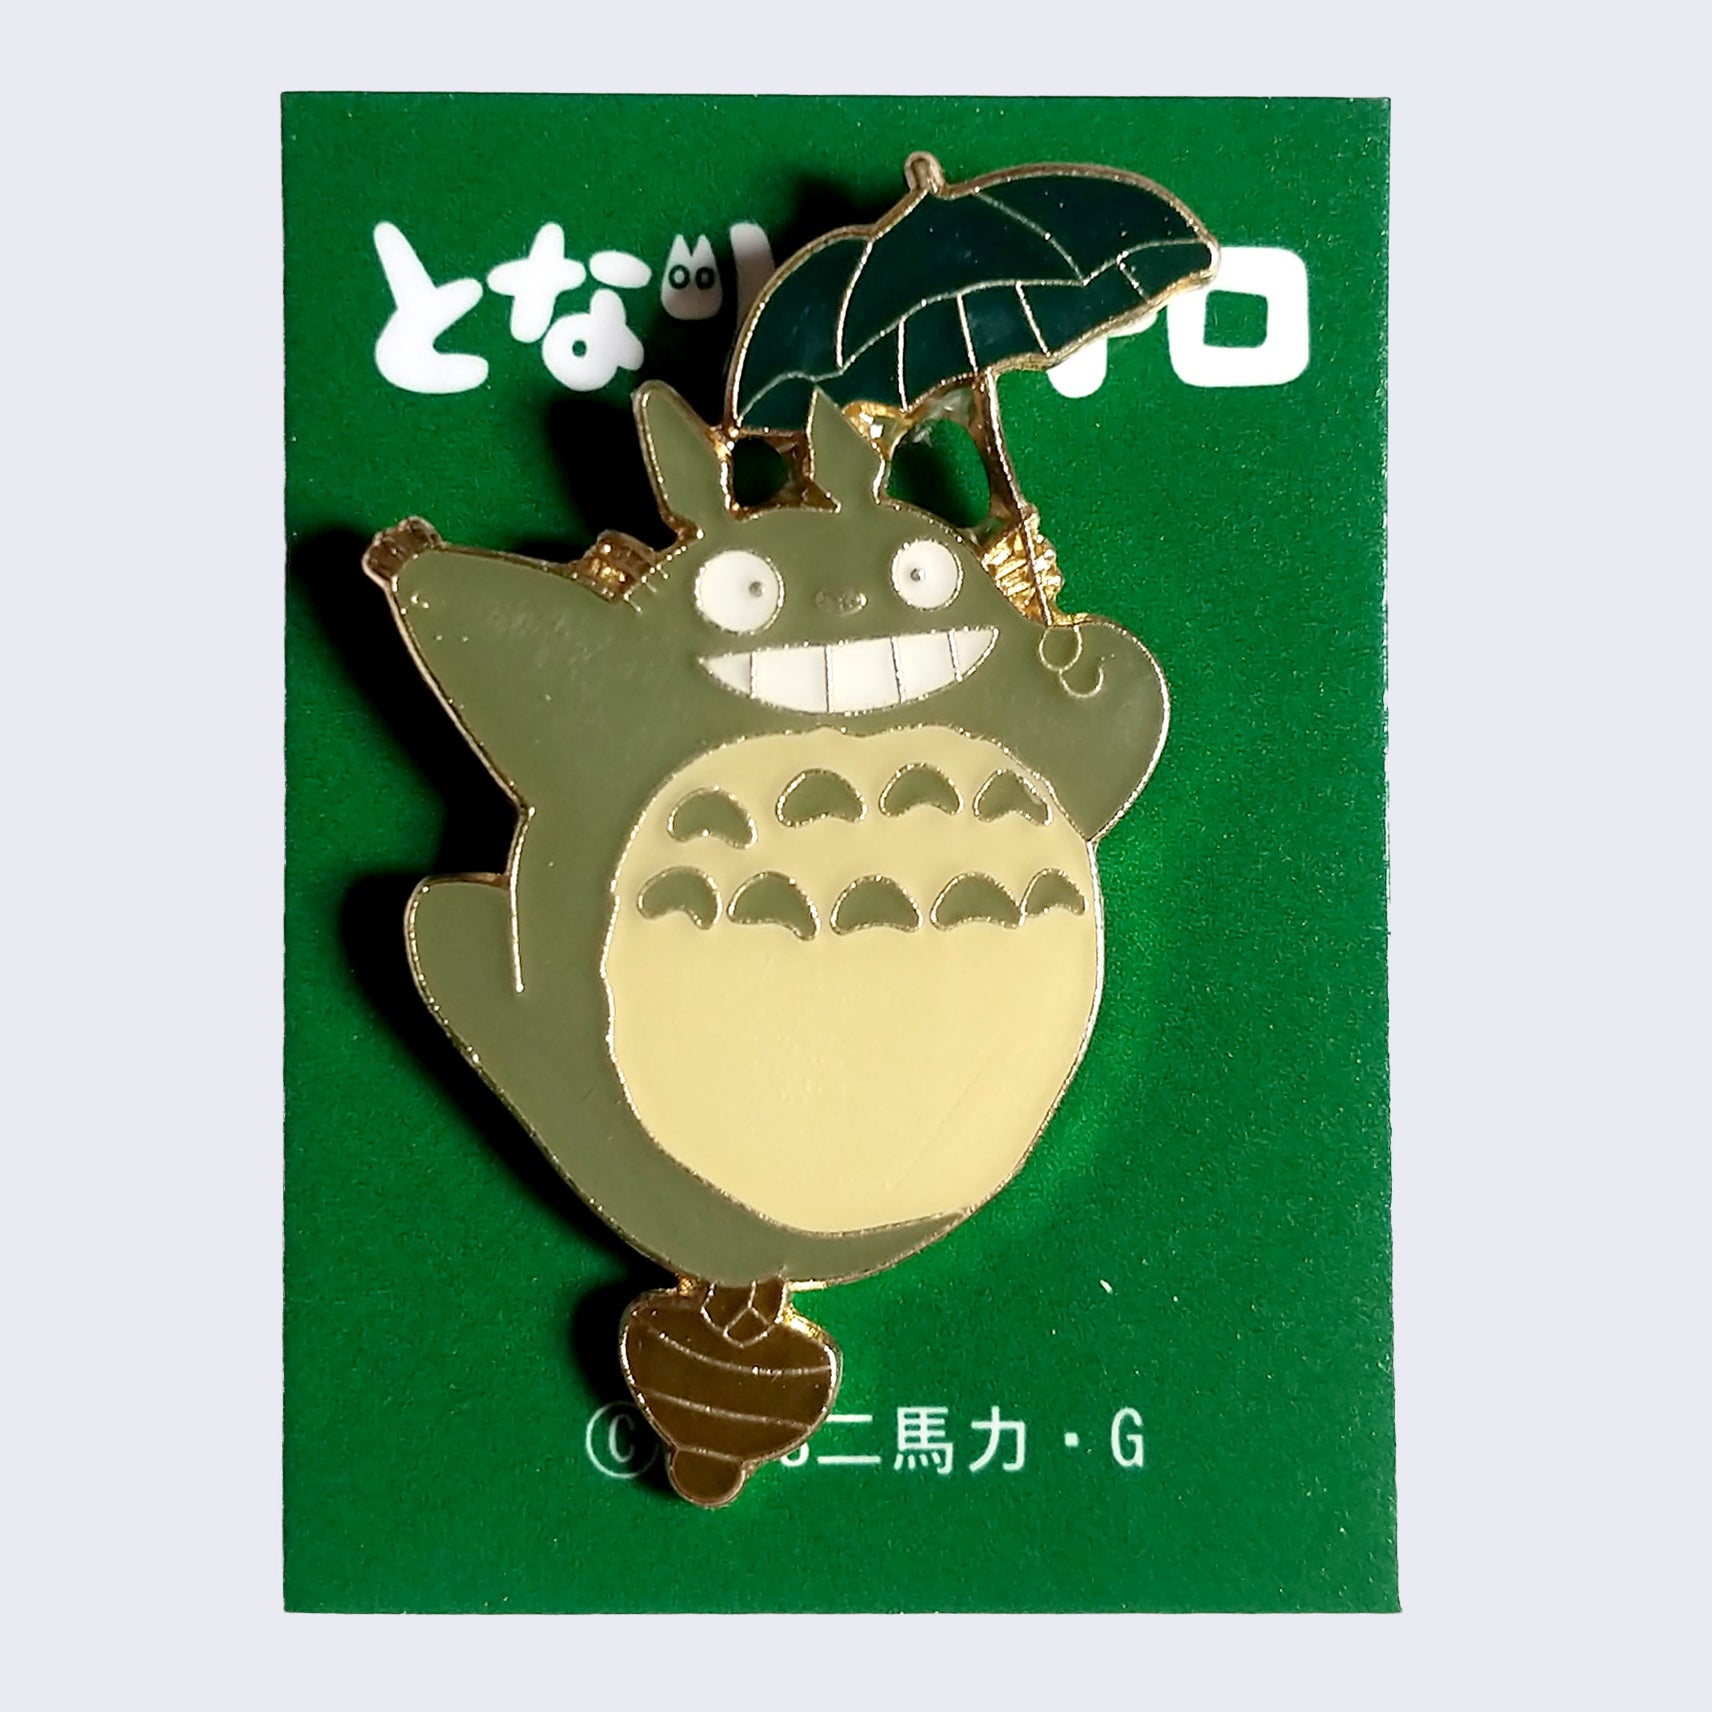 Gifts for Studio Ghibli fans: apparel, accessories, art, and more